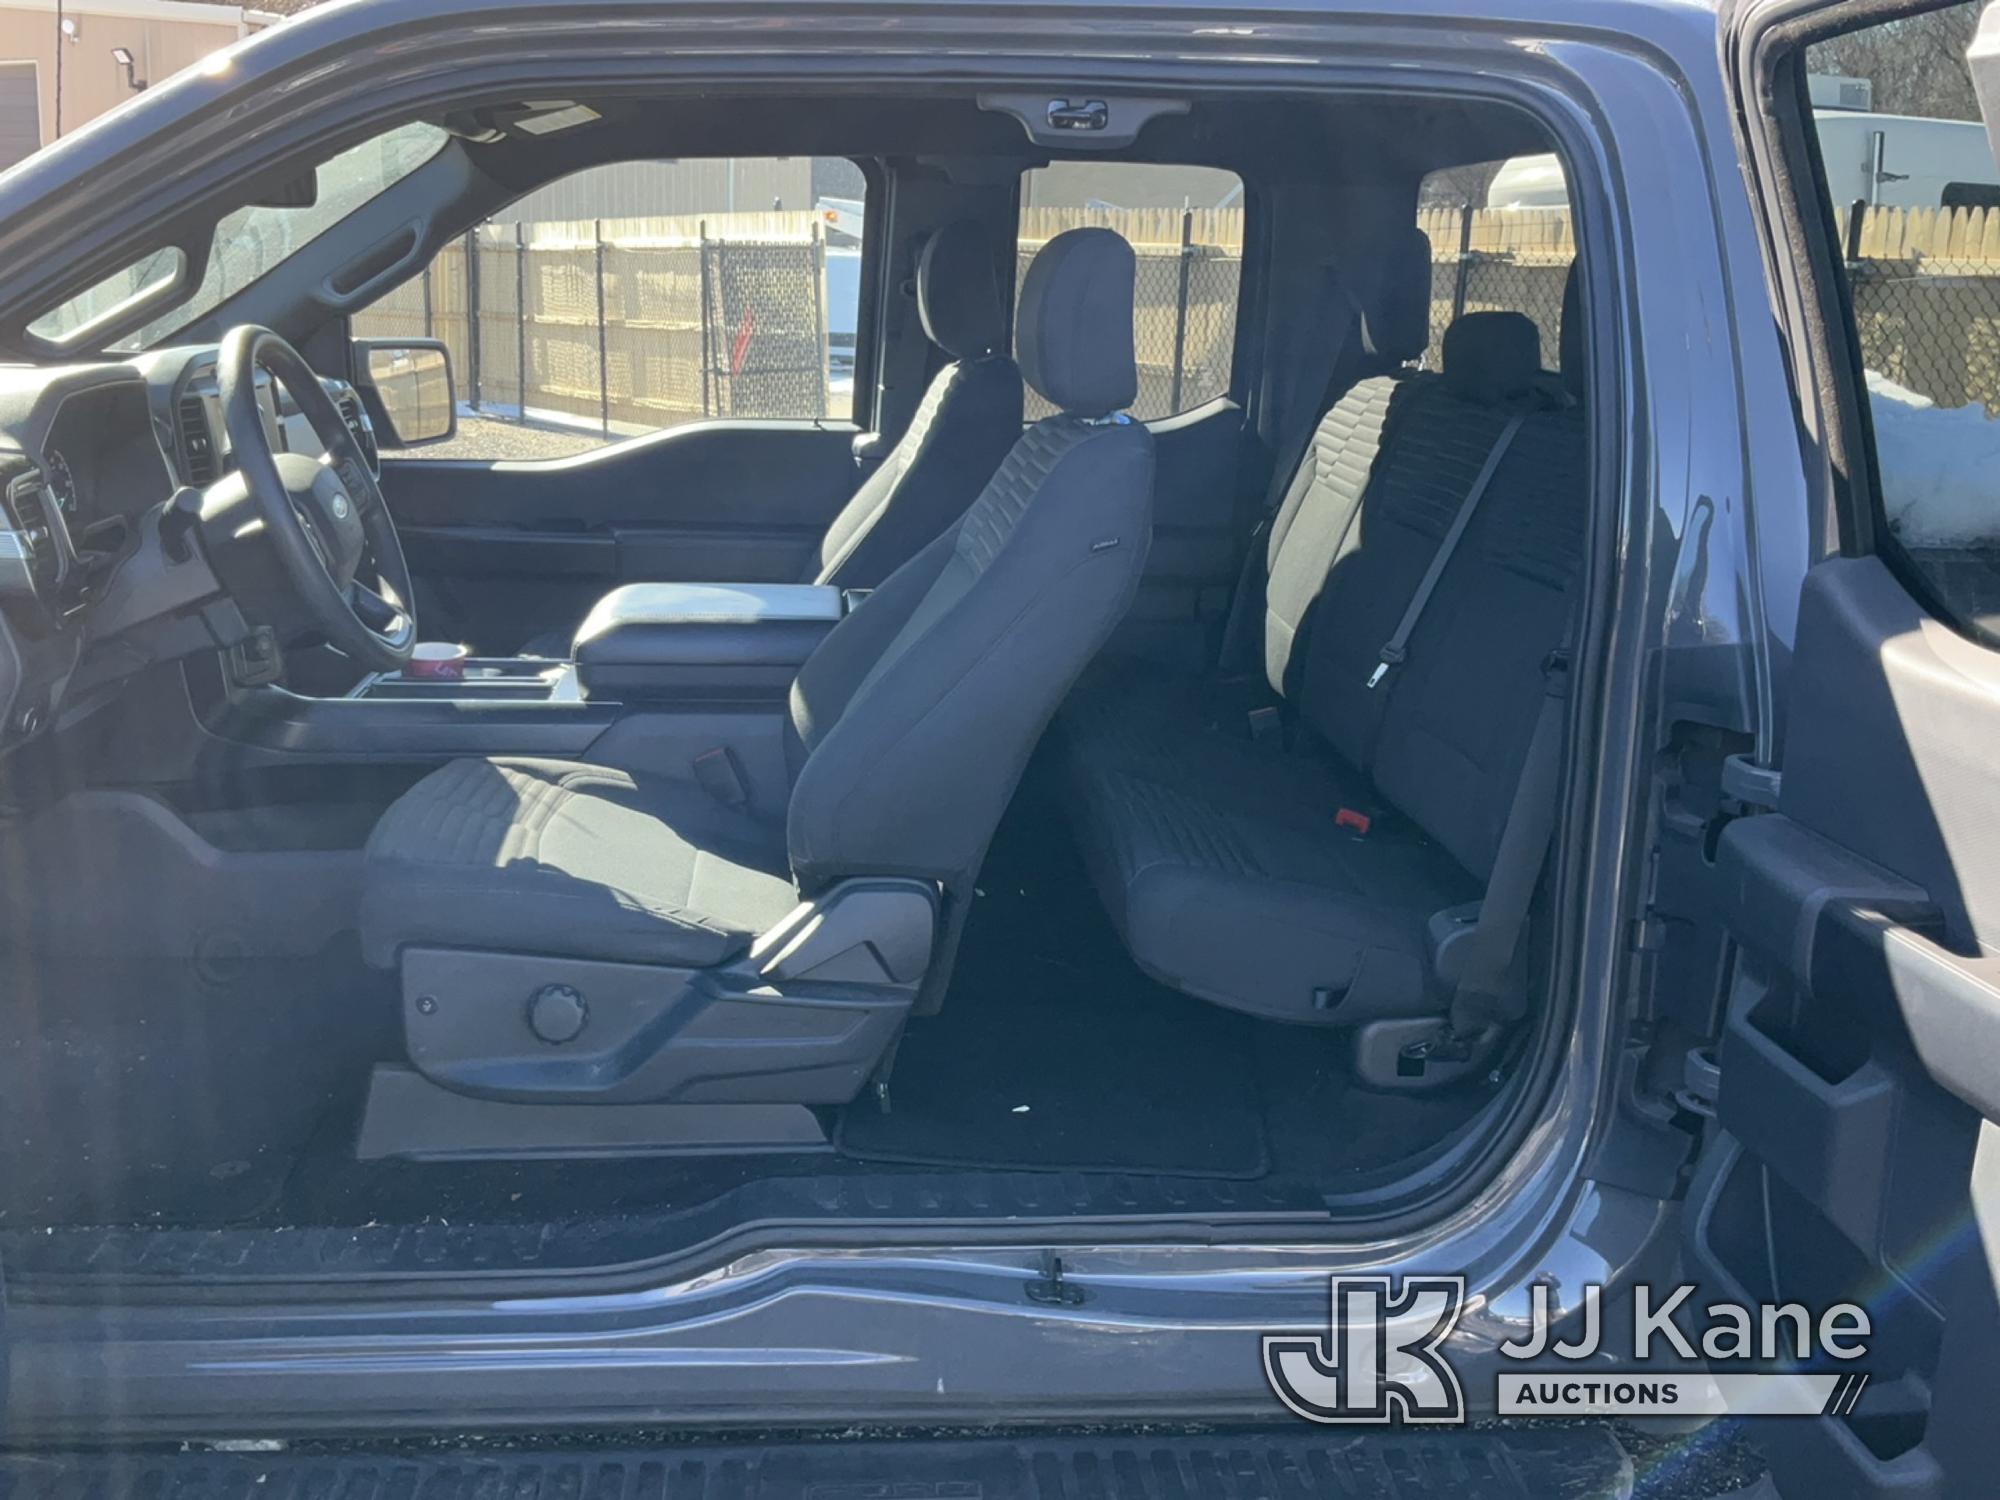 (Kings Park, NY) 2021 Ford F150 STX 4x4 Extended-Cab Pickup Truck Runs & Moves, Engine Light On) (In